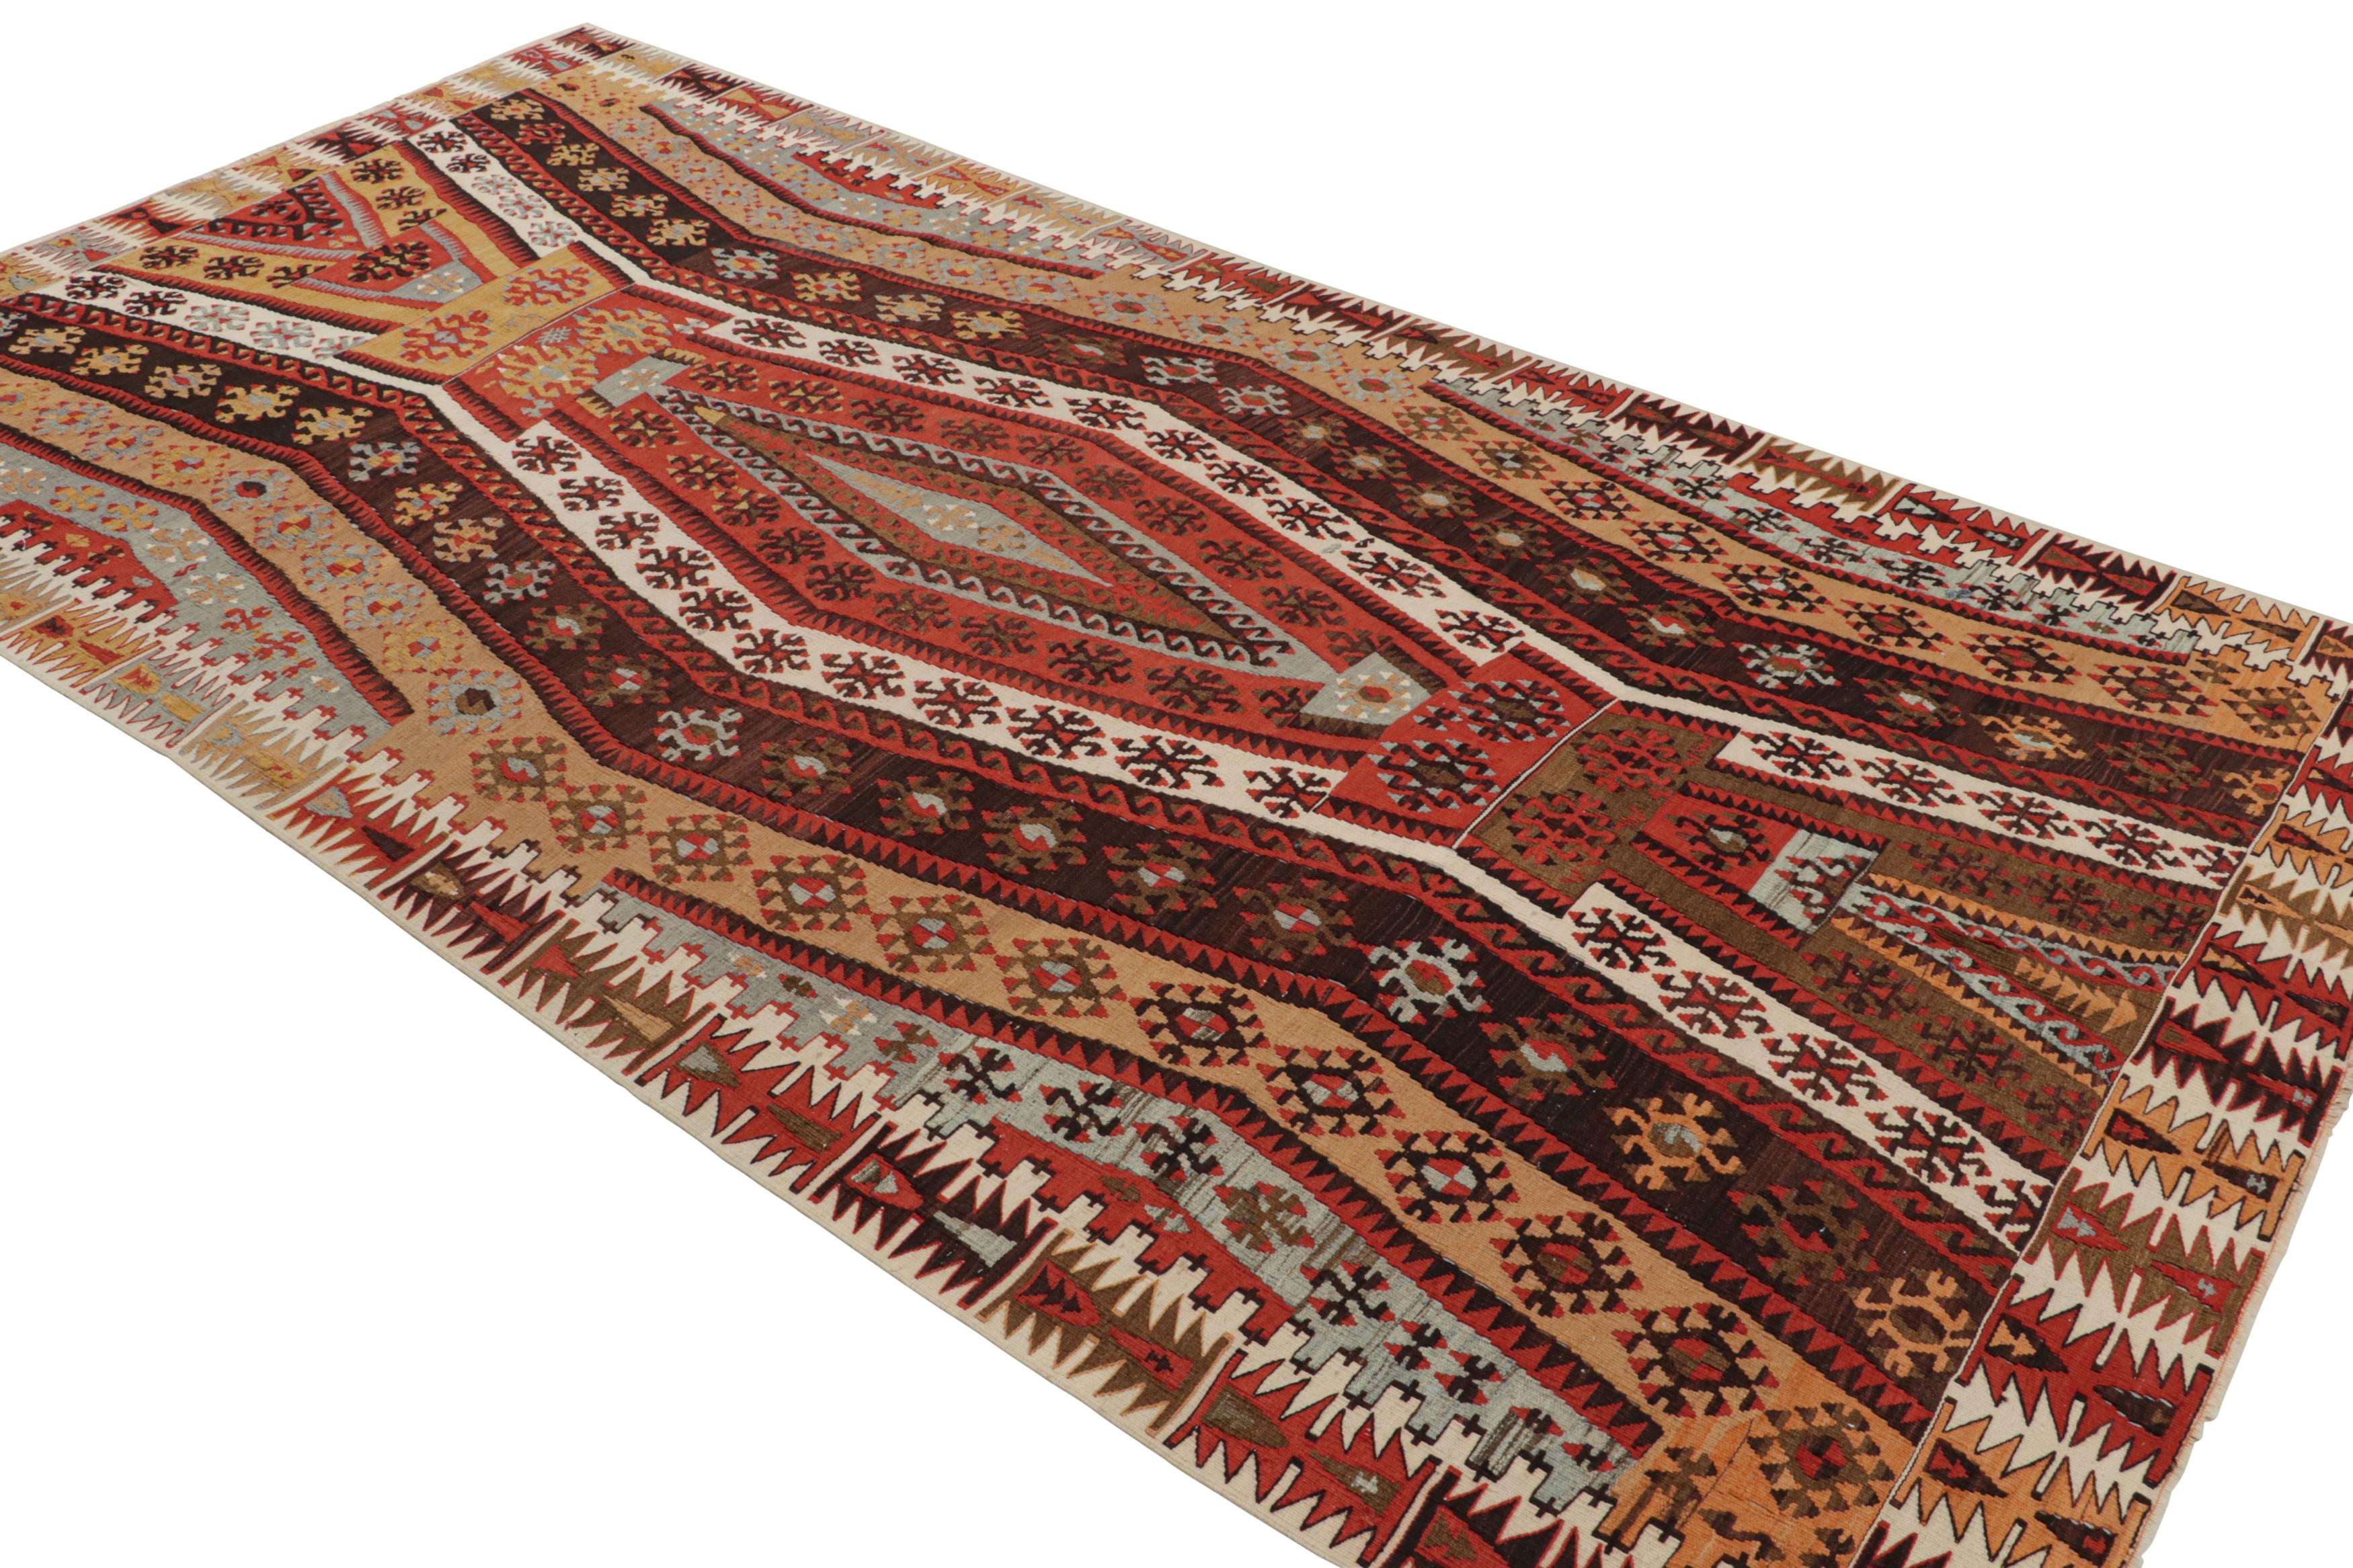 Hand-Knotted Vintage Geometric Beige Brown and Red Wool Kilim Rug by Rug & Kilim For Sale